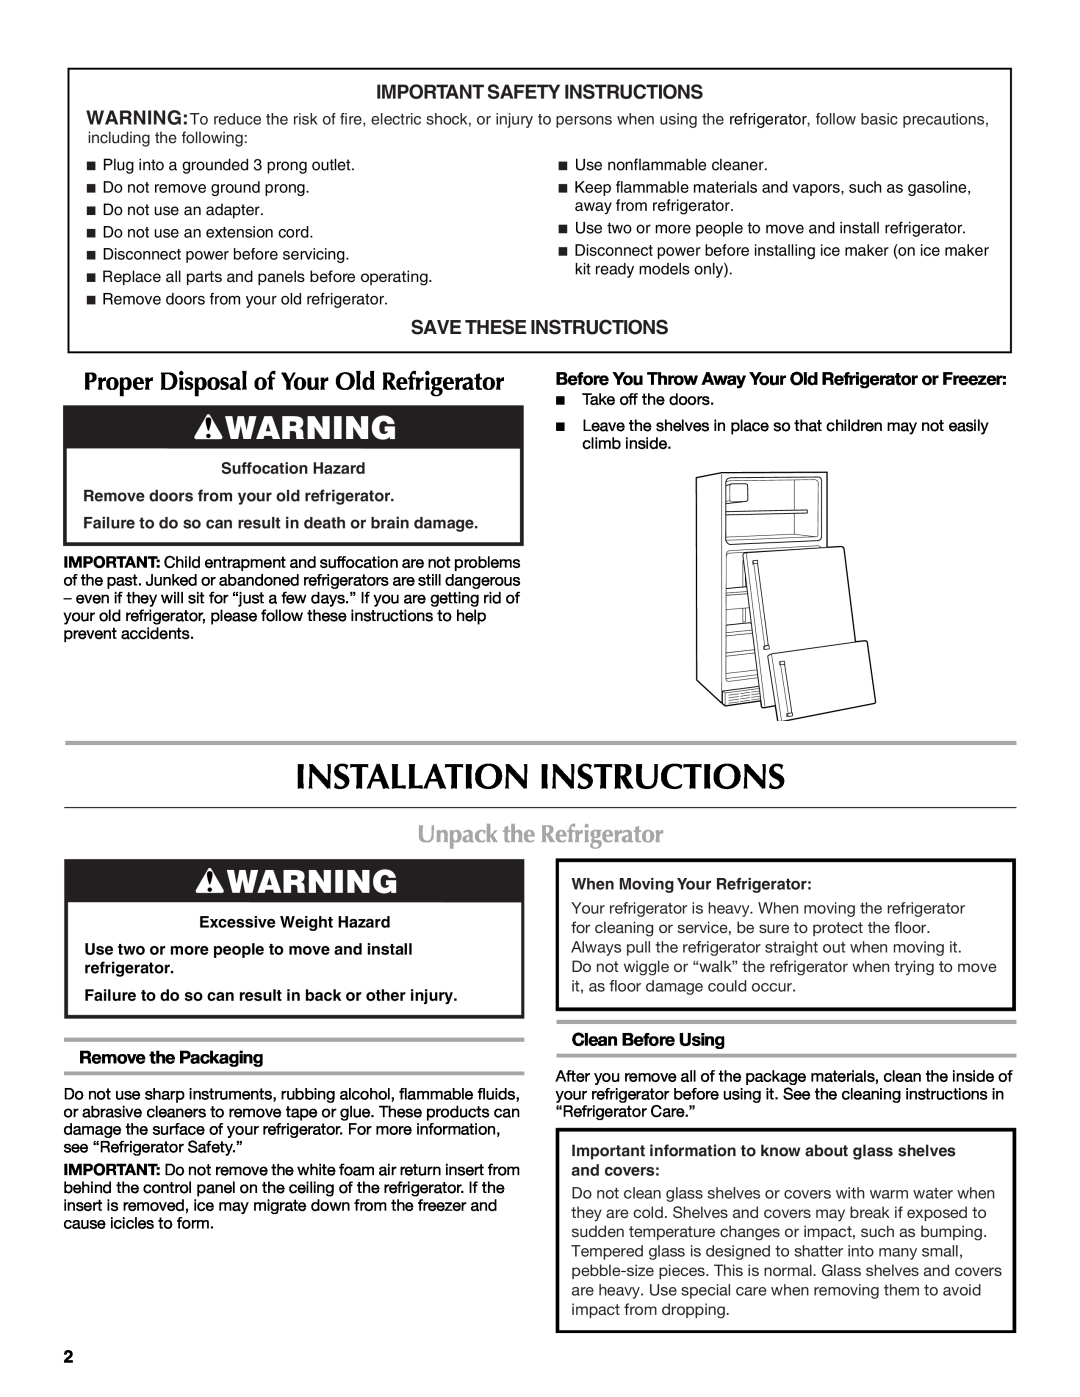 Maytag MTB2254EEW Installation Instructions, Unpack the Refrigerator, Important Safety Instructions, Remove the Packaging 